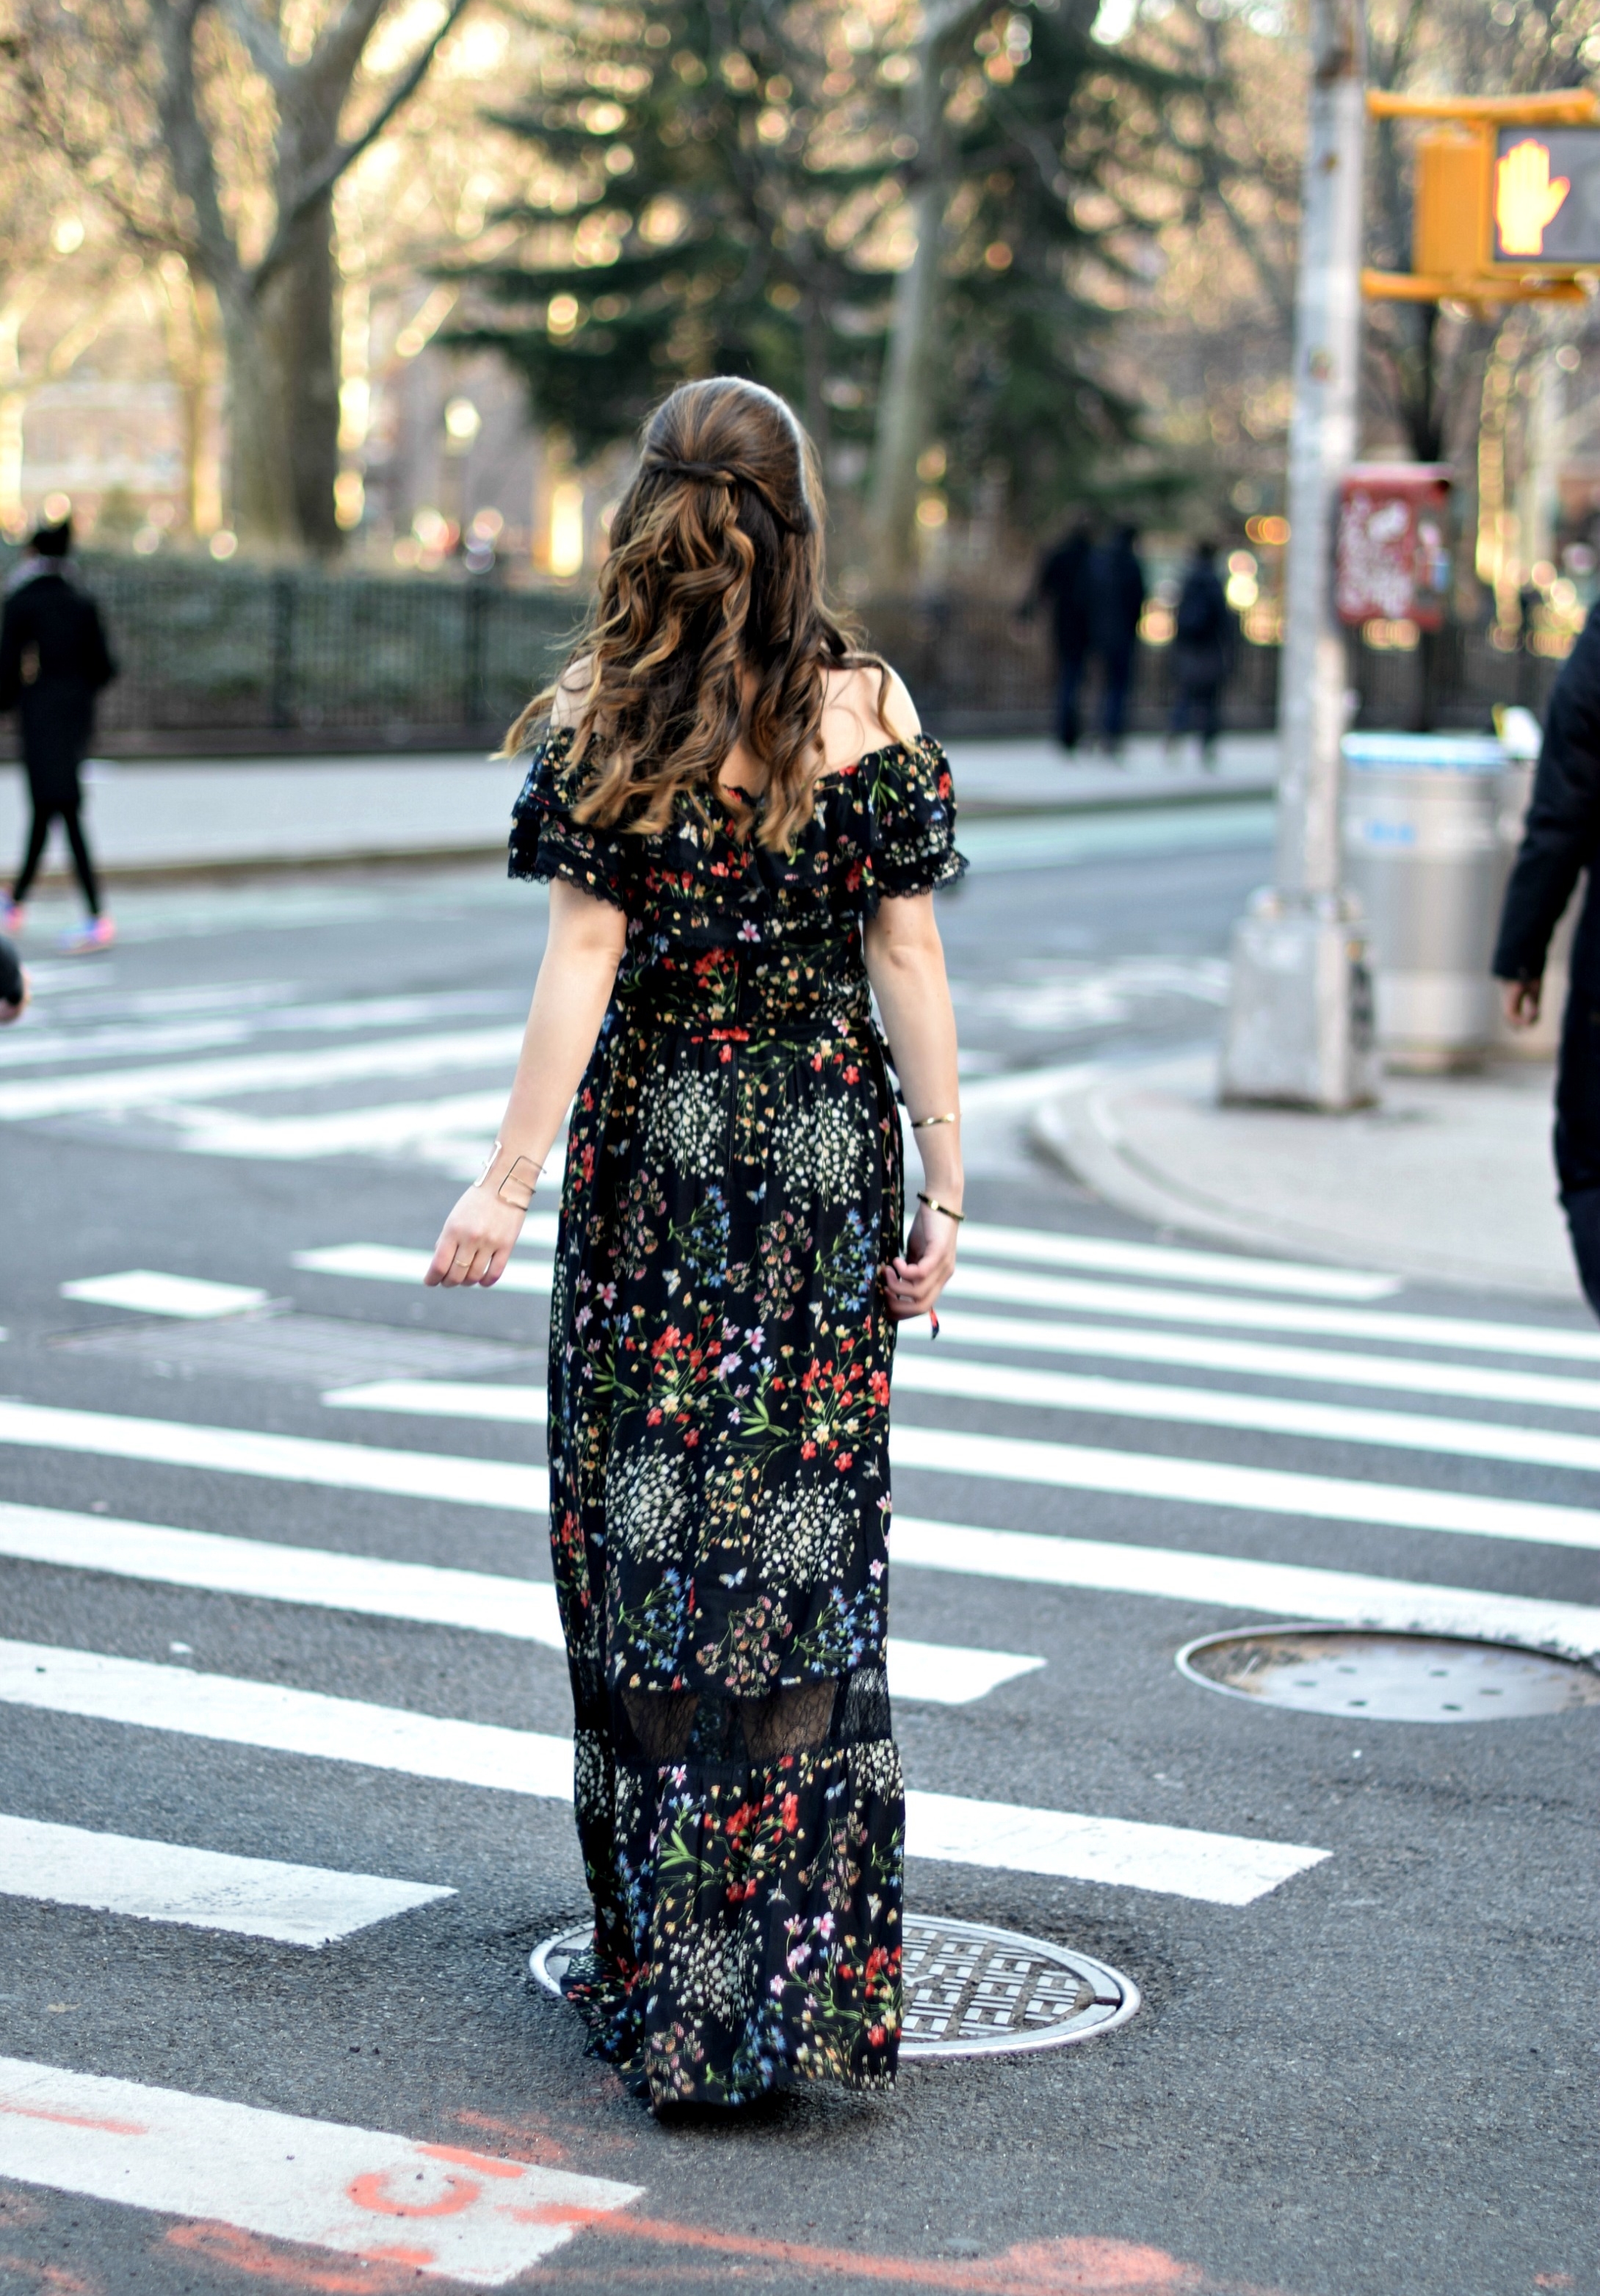 Alice Olivia Floral Dress Louboutins & Love Fashion Blog Esther Santer NYC Street Style Blogger Outfit OOTD Trunk Club Lydell Hair Brunette Model New York City Photoshoot Spring Summer Bracelet Gold Choker Jewelry Beautiful Pretty Shoulder Shoes Inspo.jpg